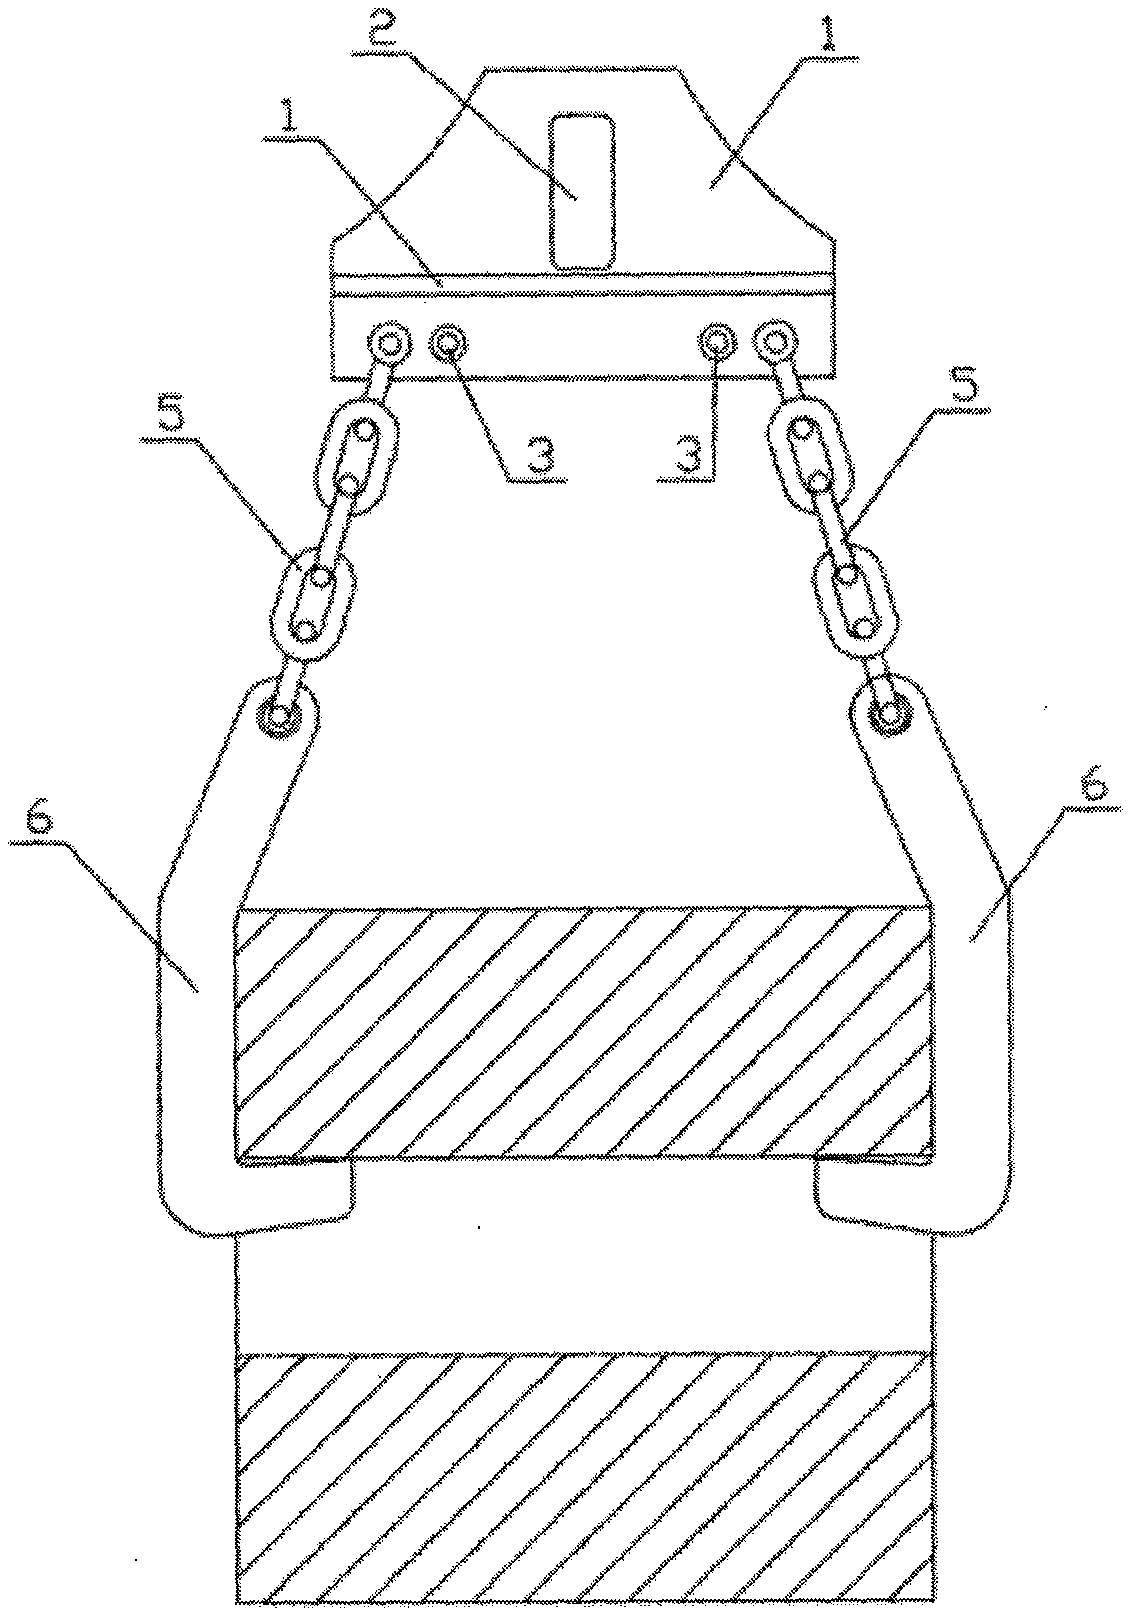 Rolled steel warehousing and delivery management method